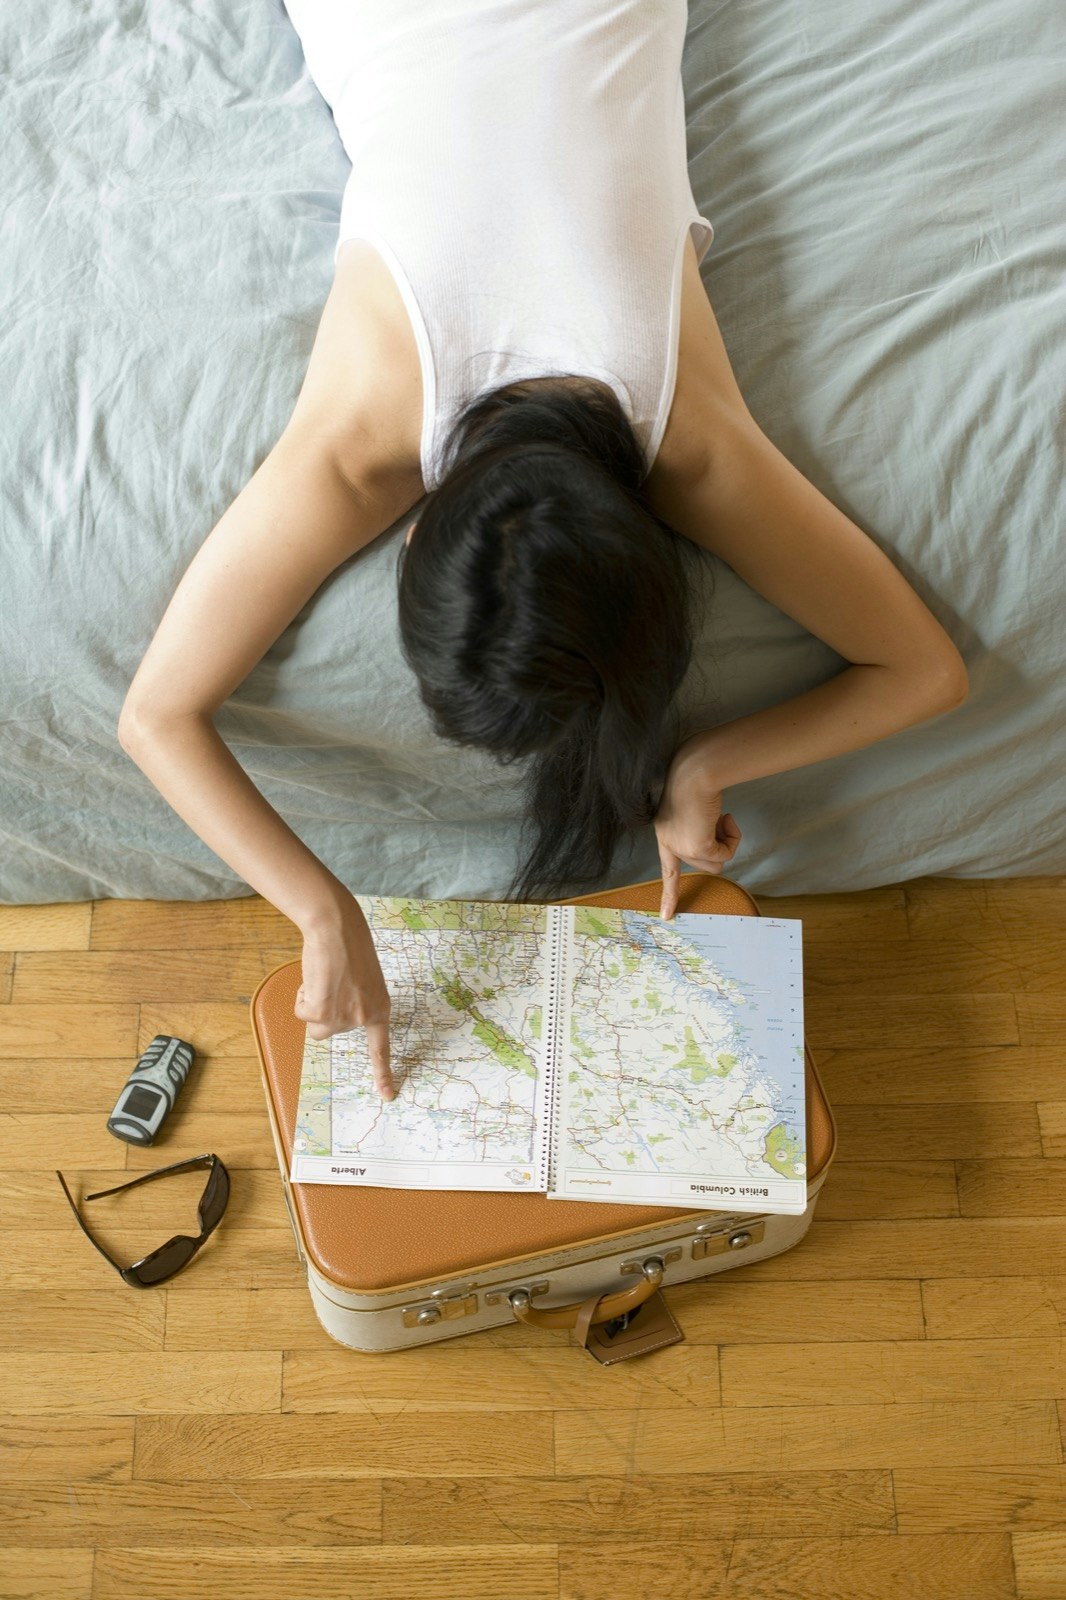 A woman lies on a bed and looks down at a map and suitcase